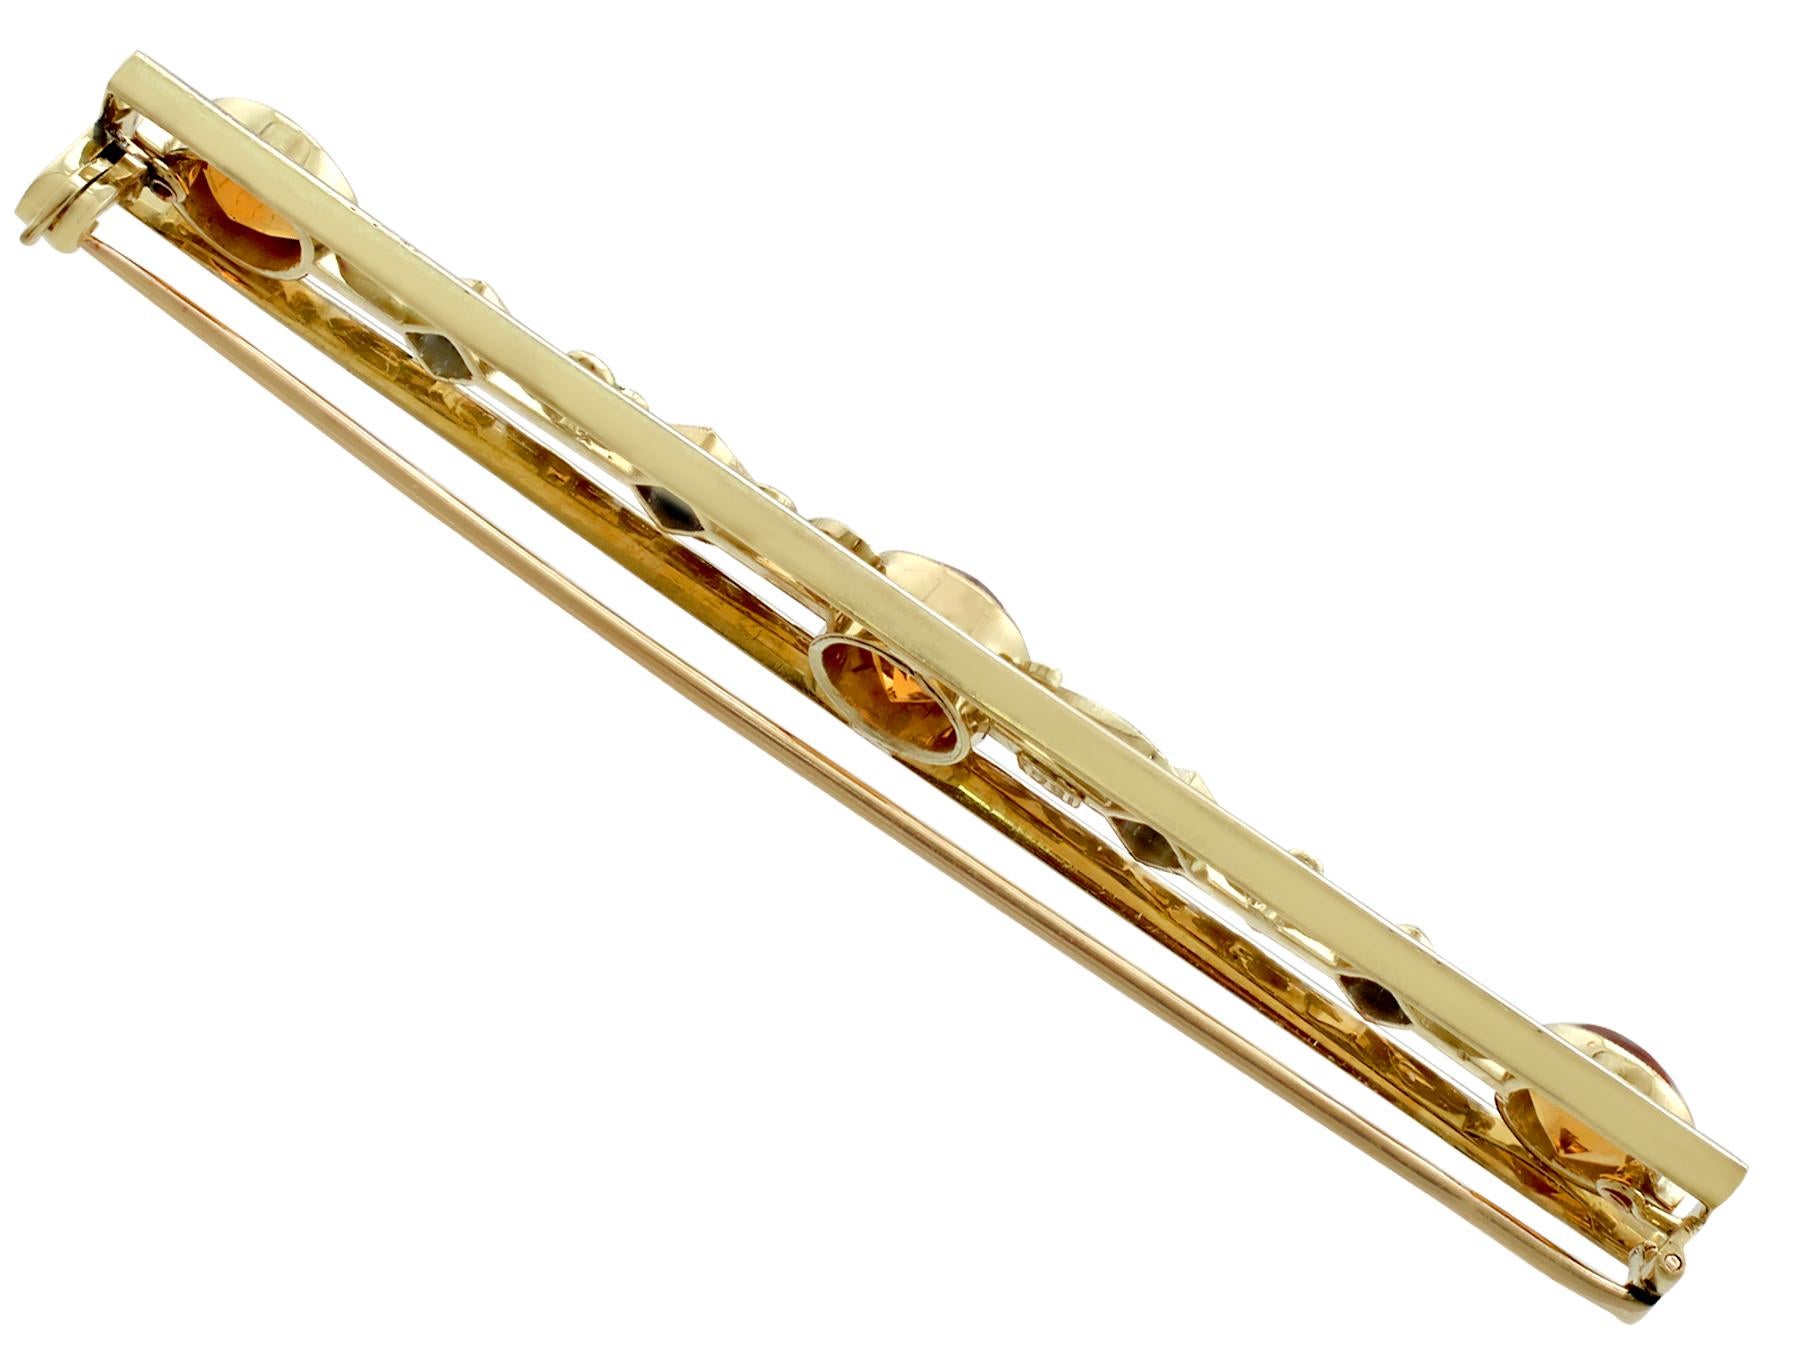 An impressive antique 3.10 carat citrine and 0.75 carat sapphire, enamel and 15 karat yellow and white gold bar brooch; part of our diverse antique jewellery collections.

This fine and impressive antique gemstone brooch has been crafted in 15k